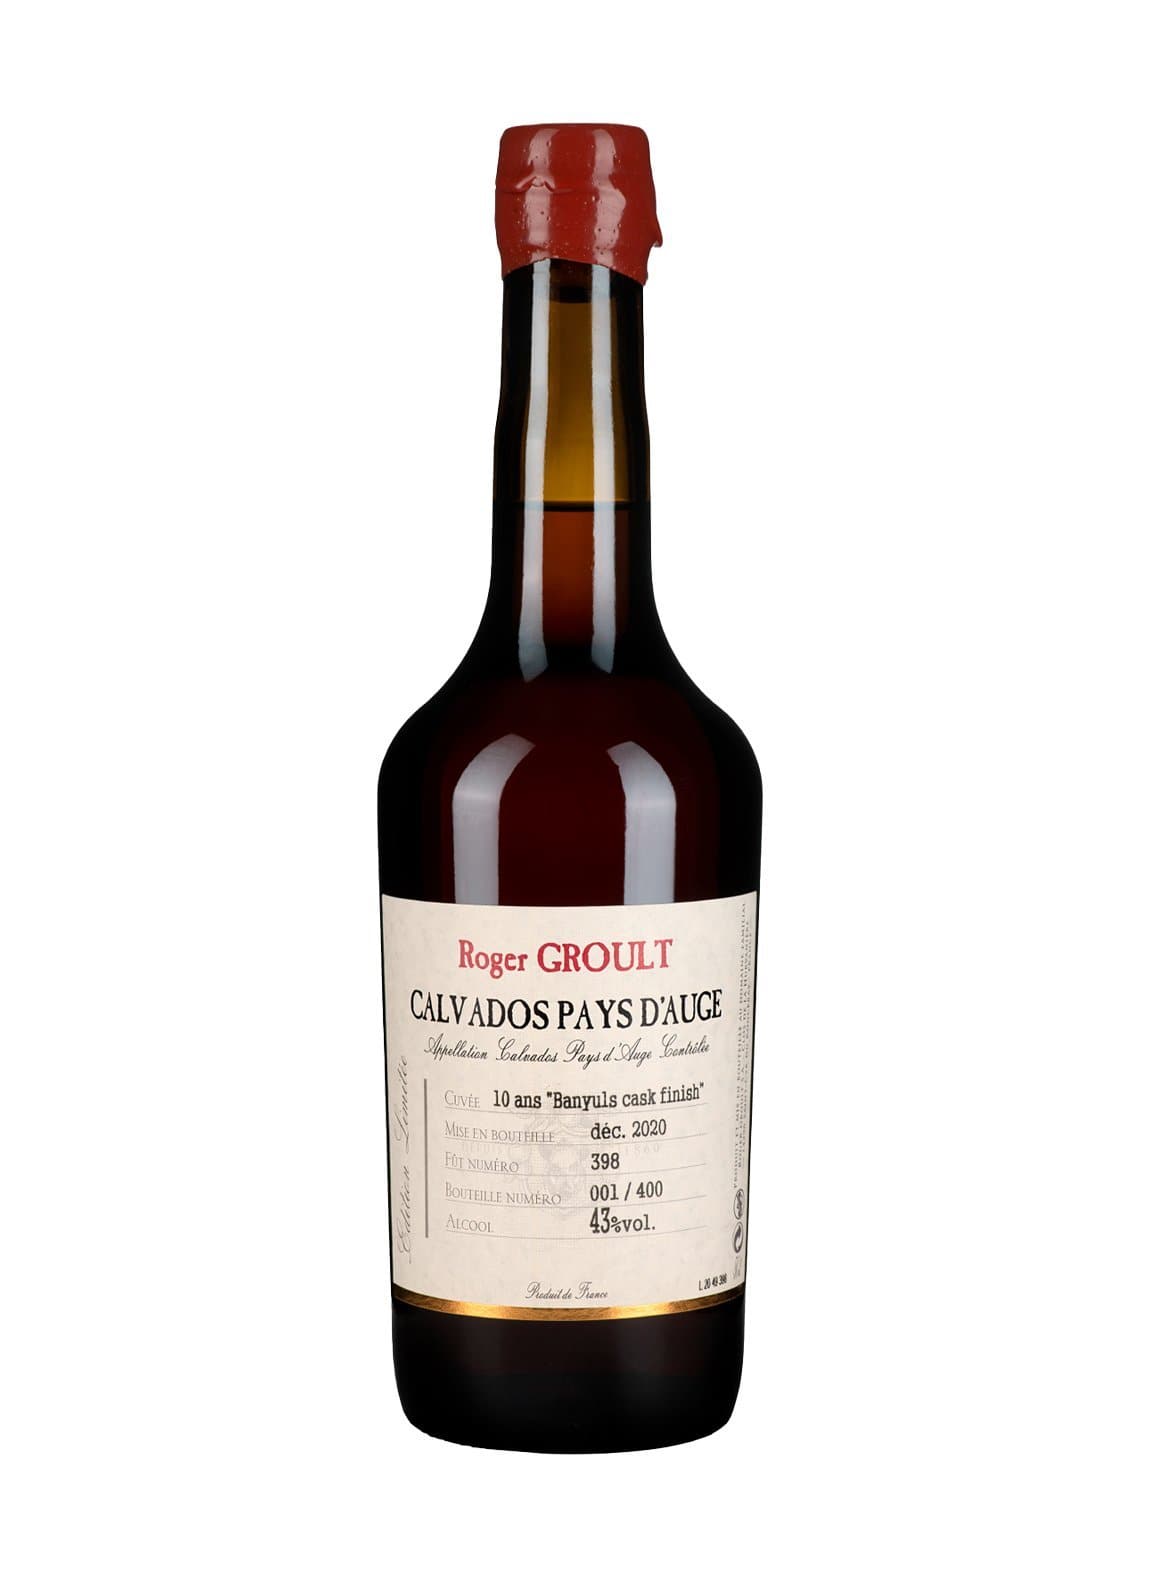 Roger Groult Calvados 10 years Banyuls Cask Finish Pays D'Auge 43% 500ml | Brandy | Shop online at Spirits of France